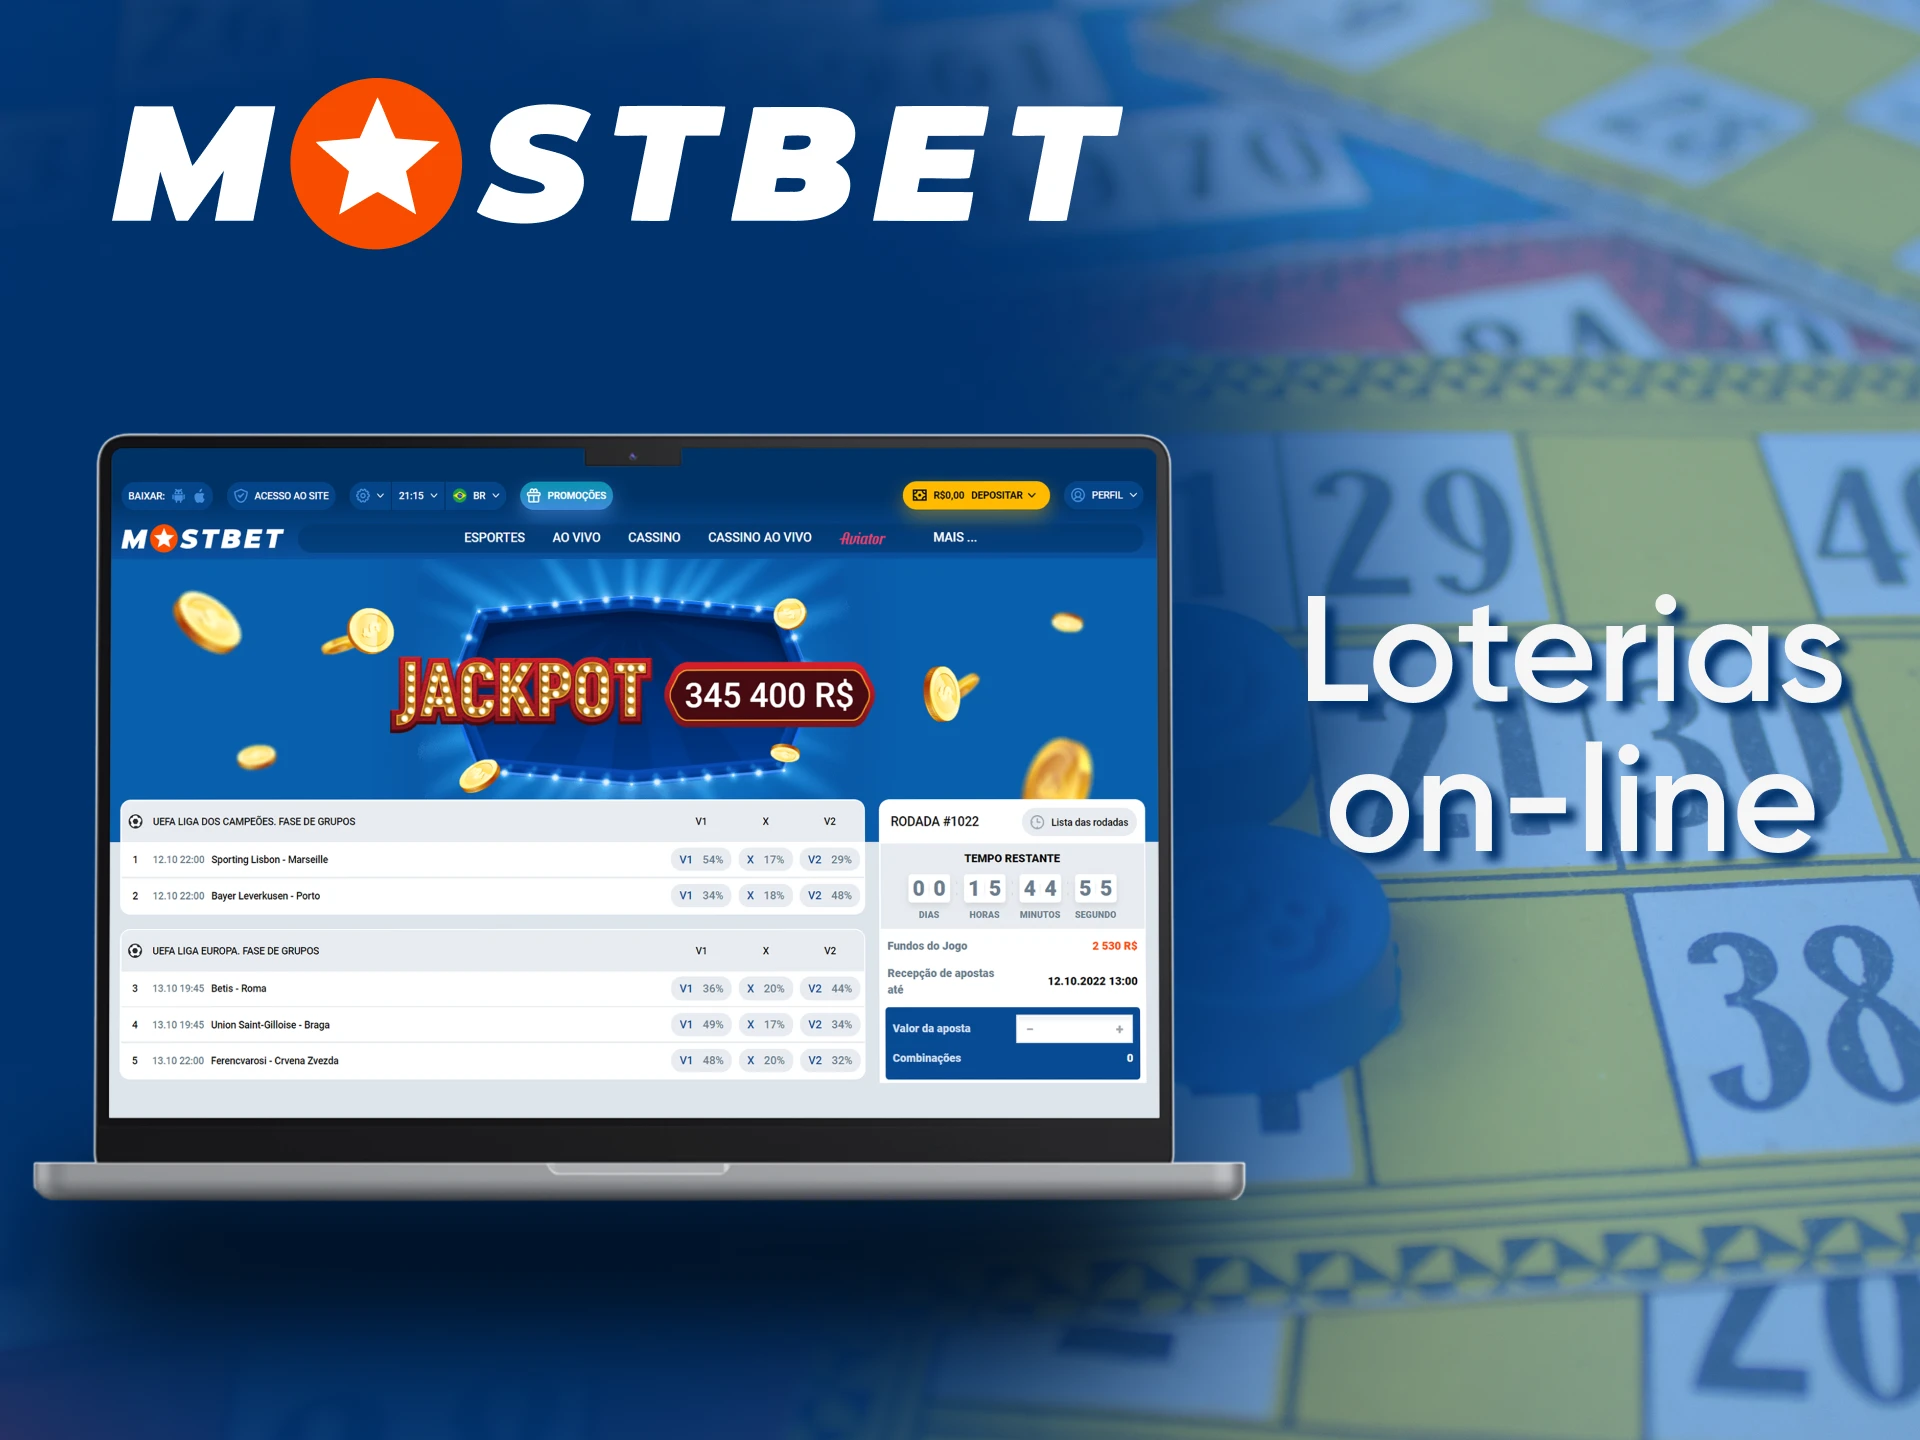 Play lotteries at Mostbet, buy tickets and increase your chances of winning.